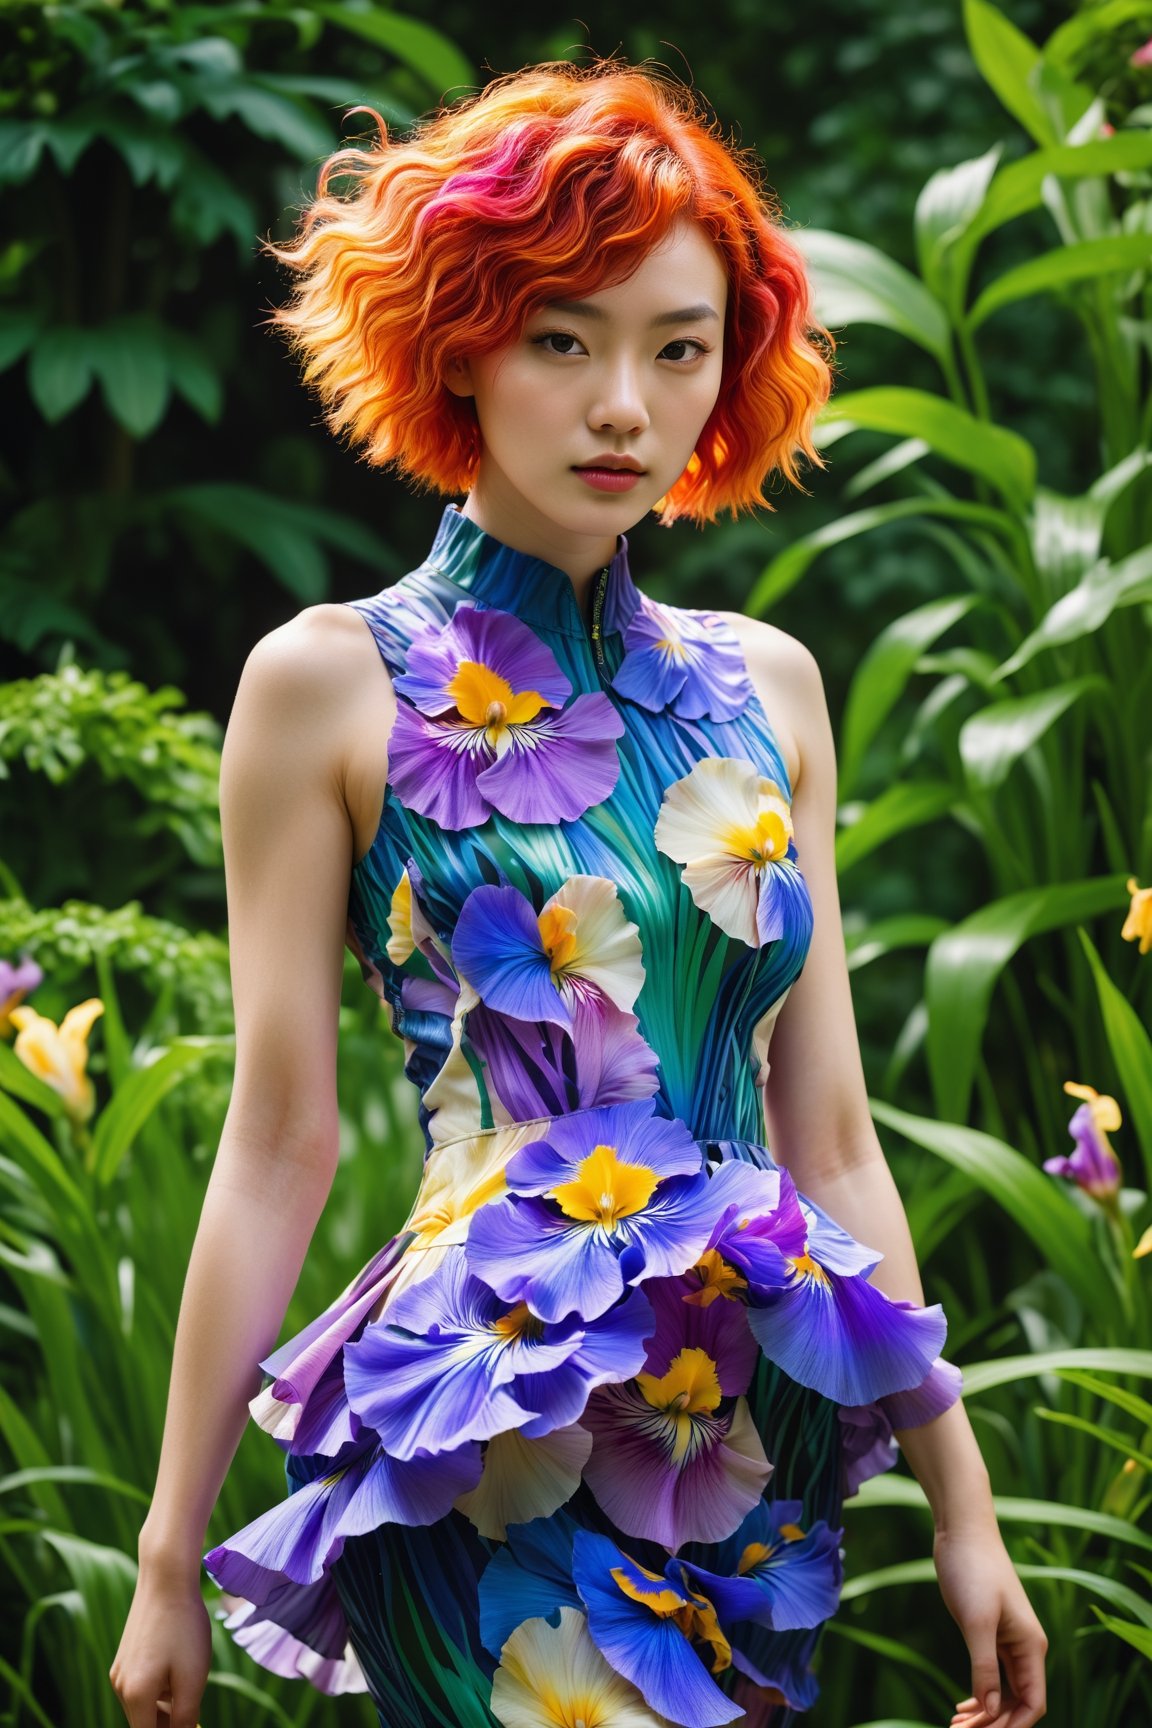 HONG KONG Girl ((September Ai)) ,  short messy hair, 

(best quality, 4k, 8k, highres, masterpiece), ultra-detailed, (realistic, photorealistic, photo-realistic), outdoor photoshoot, summer fashion, stunning model with vibrant multicolored hair, wearing a bright, floral-patterned Iris van Herpen dress, dynamic runway setting, lush garden background, vivid, lively, sunlit, high-fashion editorial, magazine photoshoot, energetic fashion poses, kaleidoscope of colors
